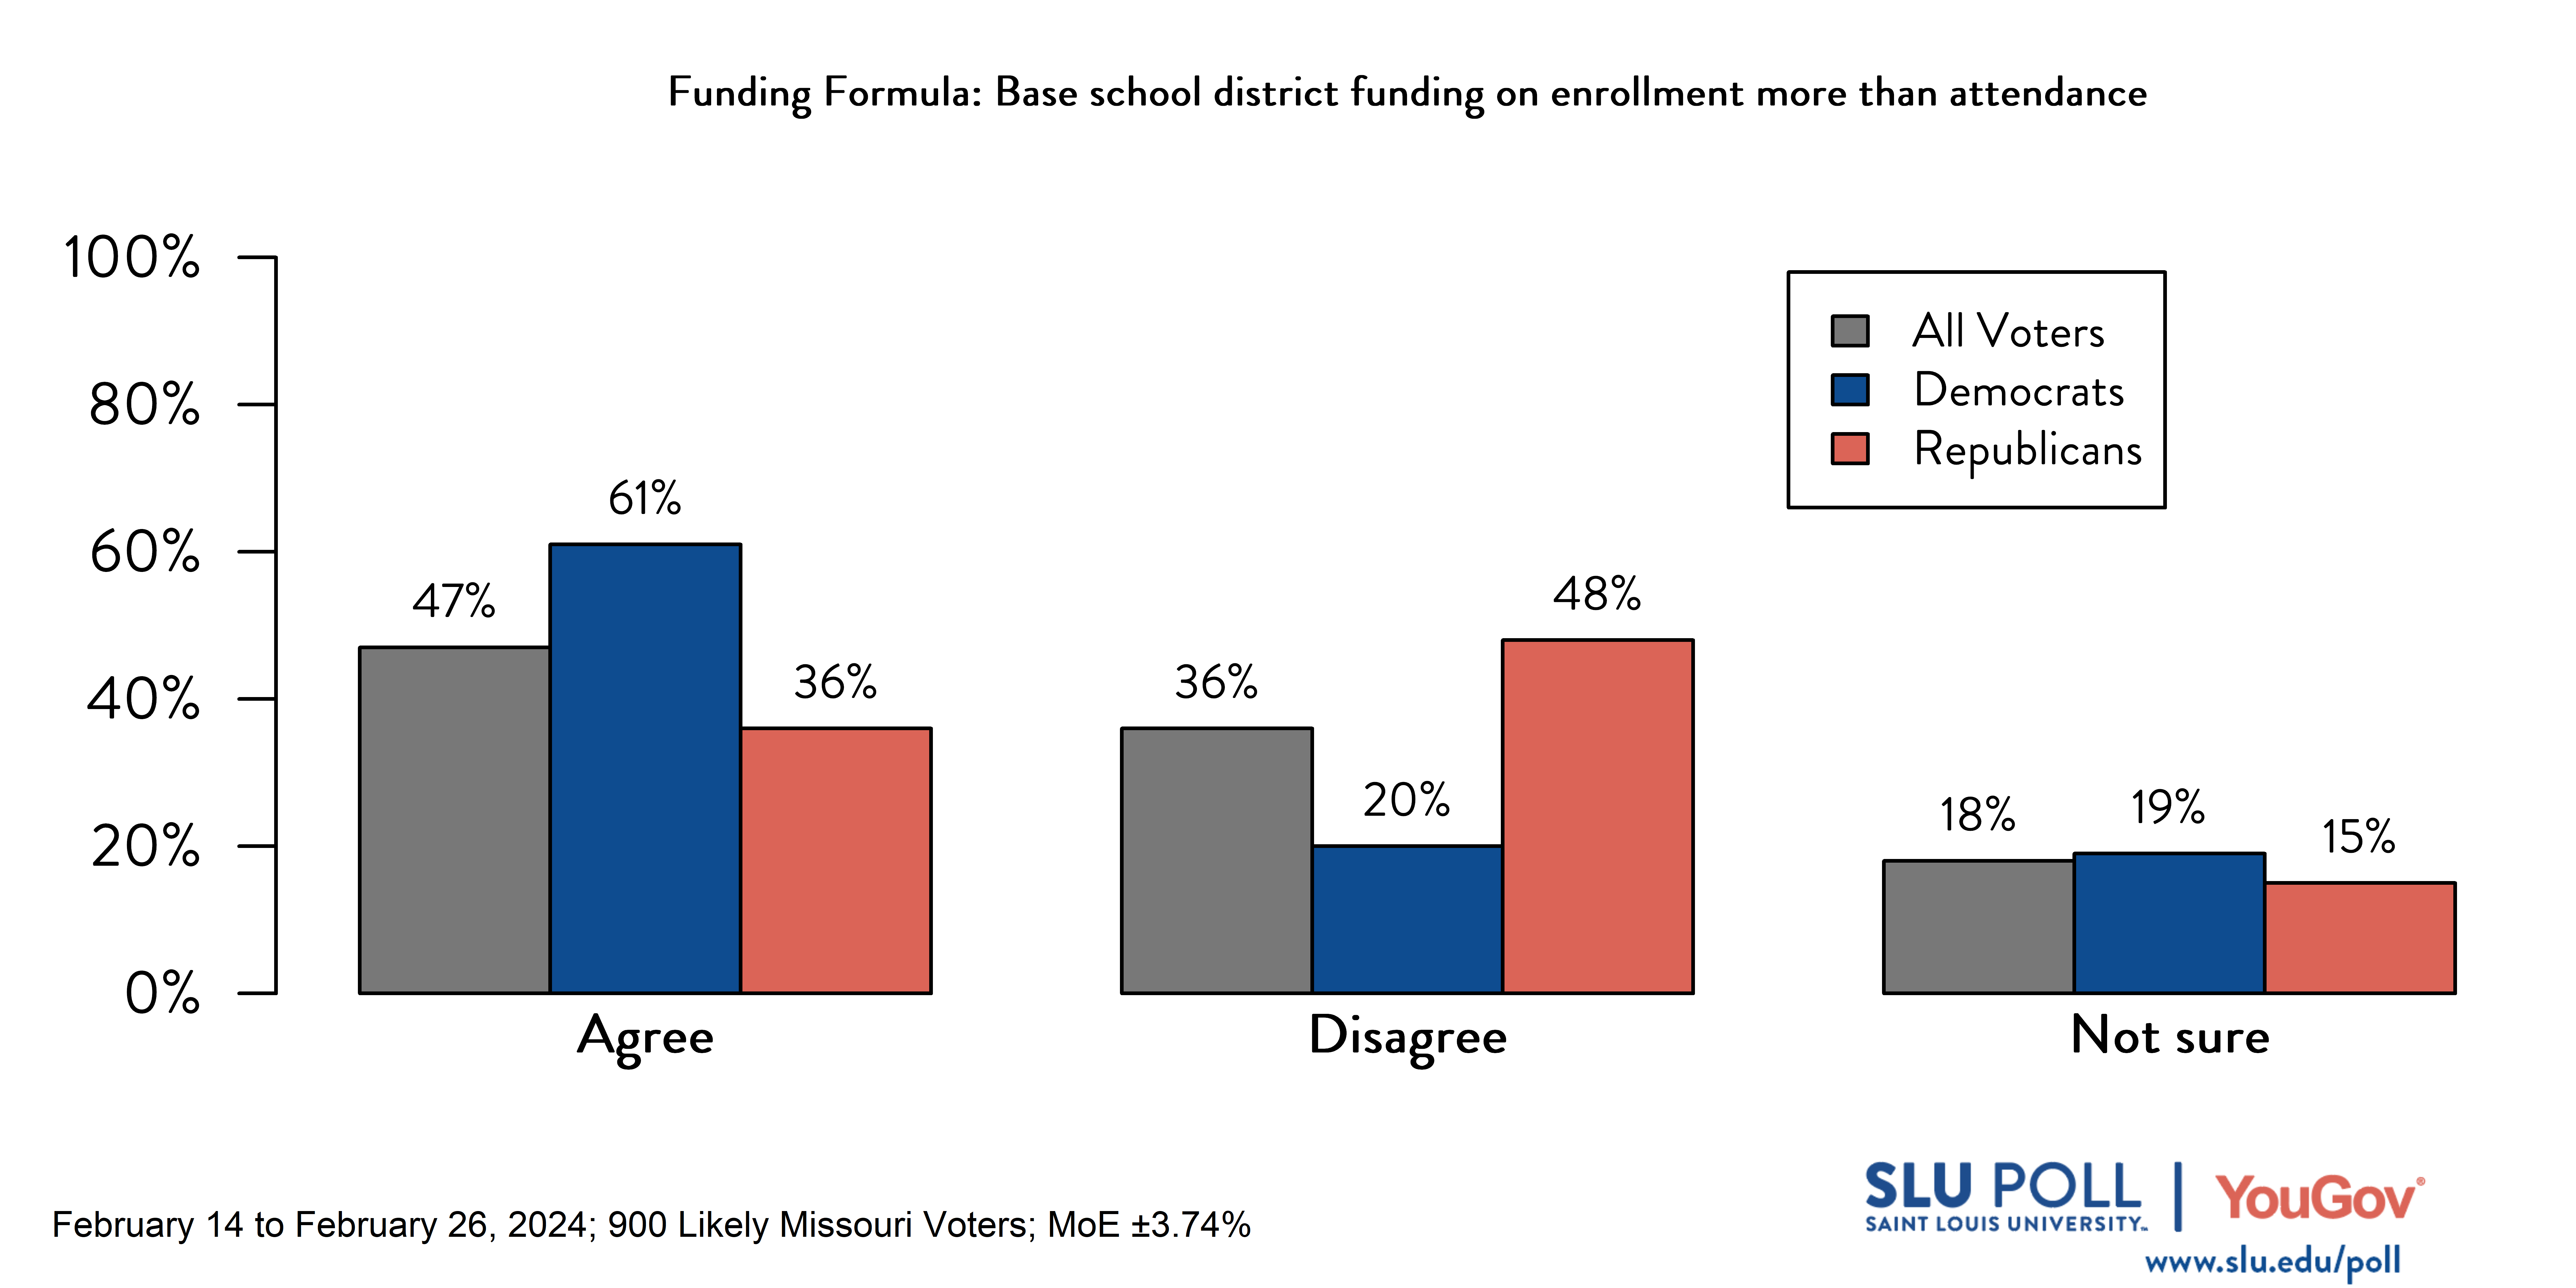 Likely voters' responses to 'Do you agree or disagree that this funding formula should do the following…Base school district funding on enrollment more than attendance?': 47% Agree, 36% Disagree, and 18% Not Sure. Democratic voters' responses: ' 61% Agree, 20% Disagree, and 19% Not Sure. Republican voters' responses:  36% Agree, 48% Disagree, and 15% Not Sure.